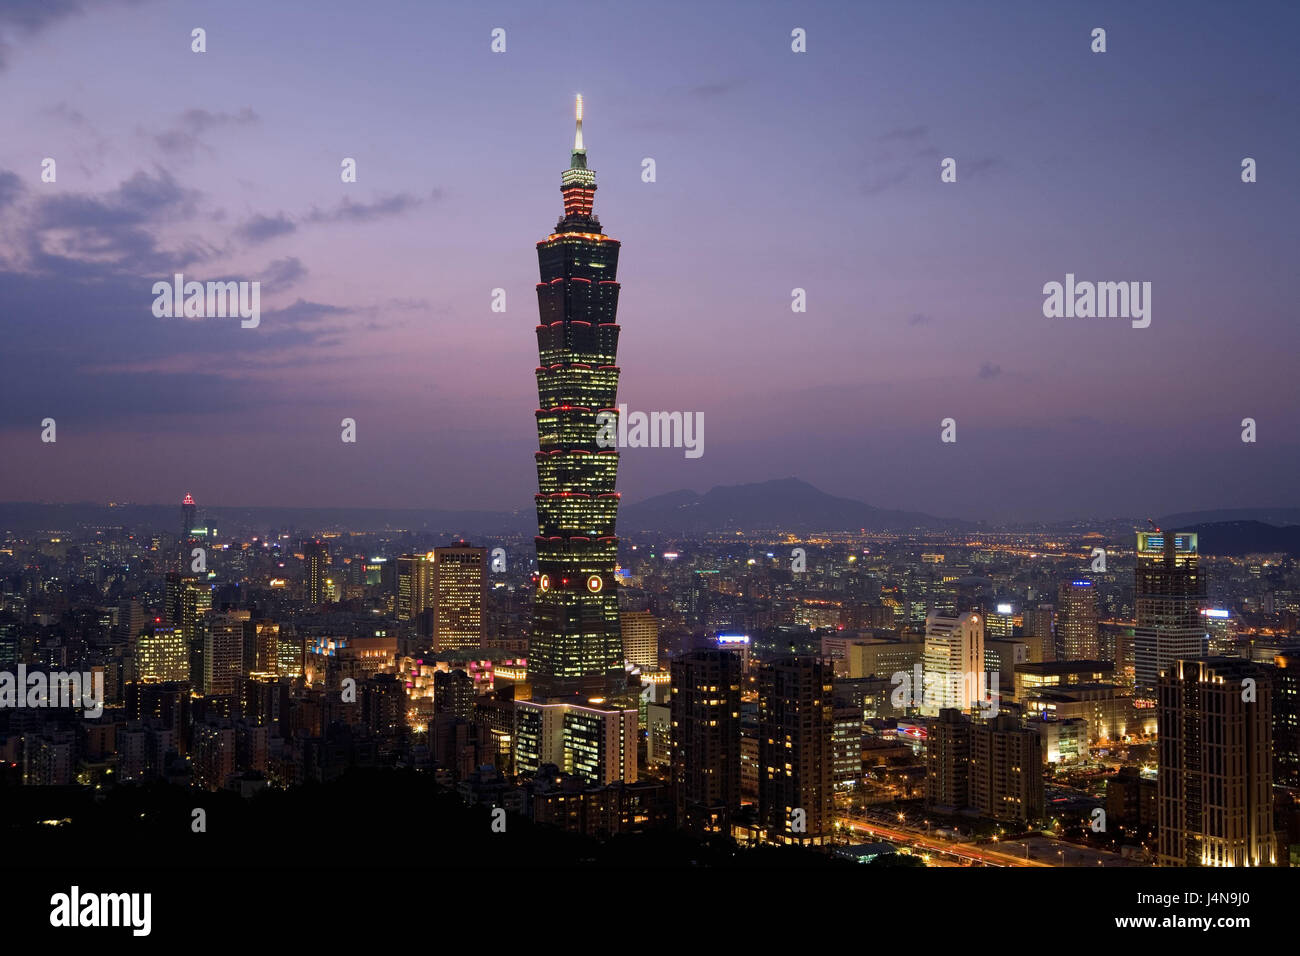 Taiwan, Taipeh, town view, Taipei Financial centre, lights, evening, no property release, Asia, Eastern Asia, town, capital, city, metropolis, building, skyscraper, high rise, architecture, Stock Photo